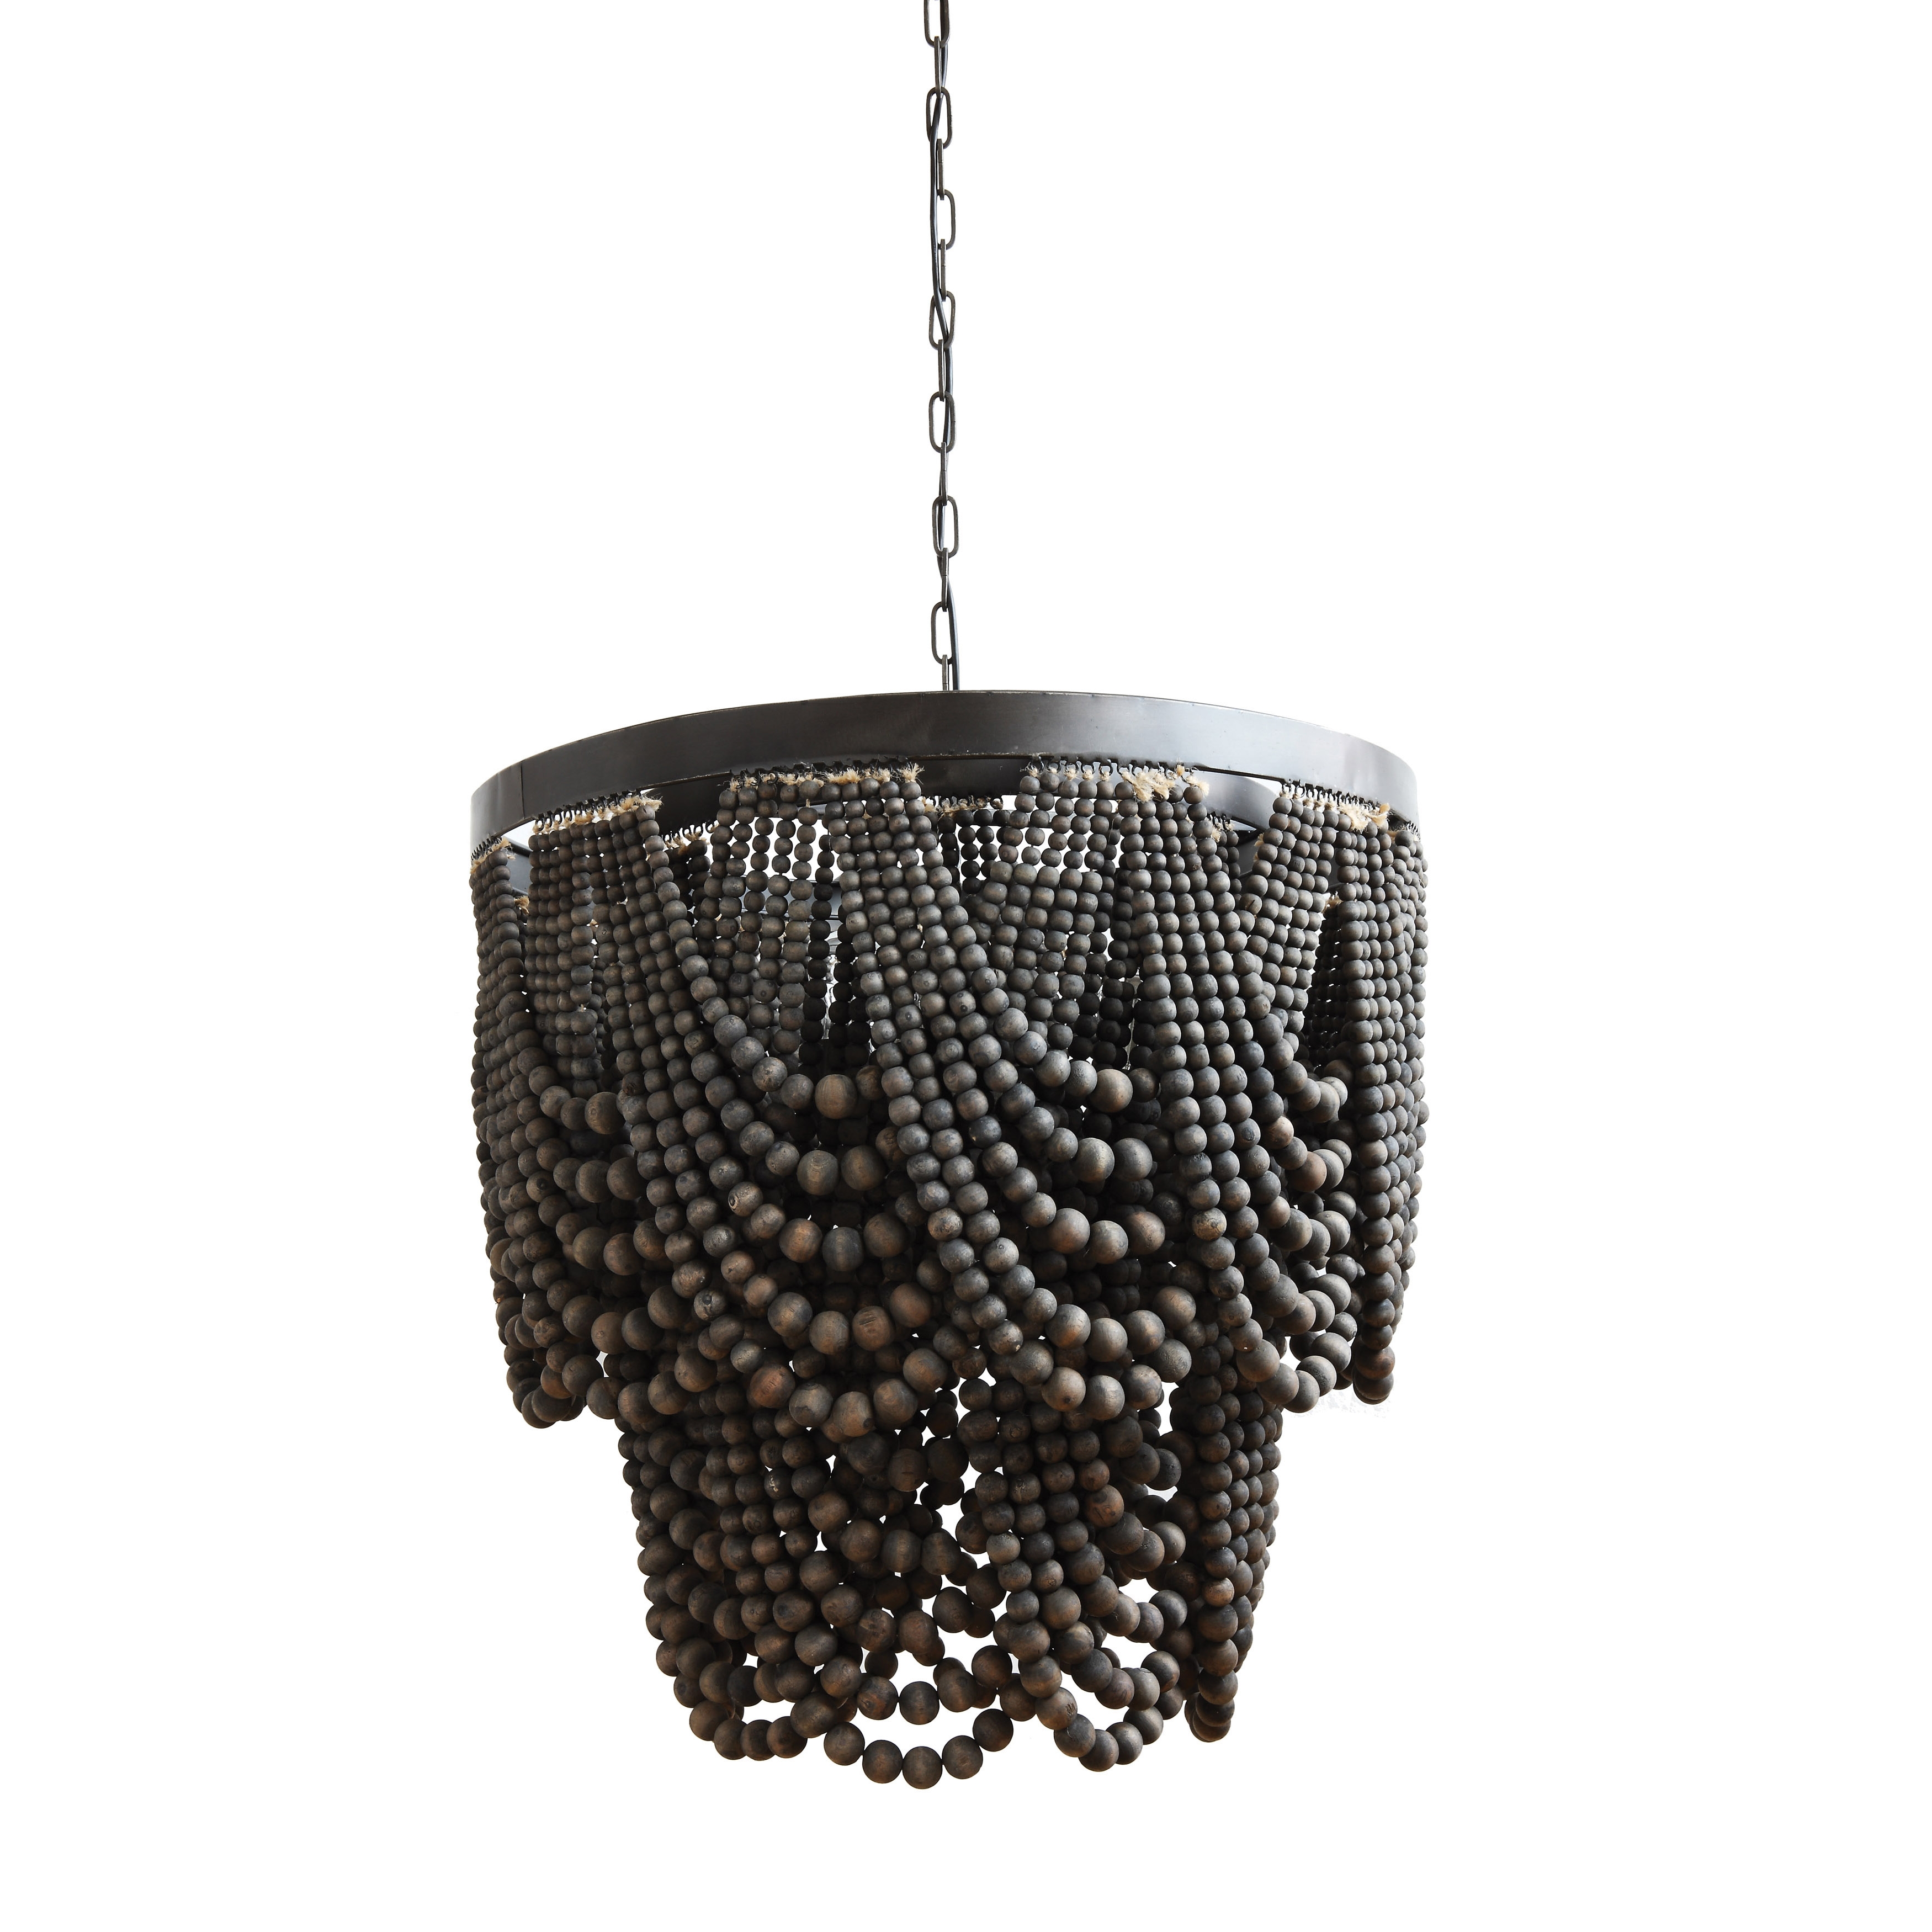 Black Metal Chandelier with Wood Beads - Image 0